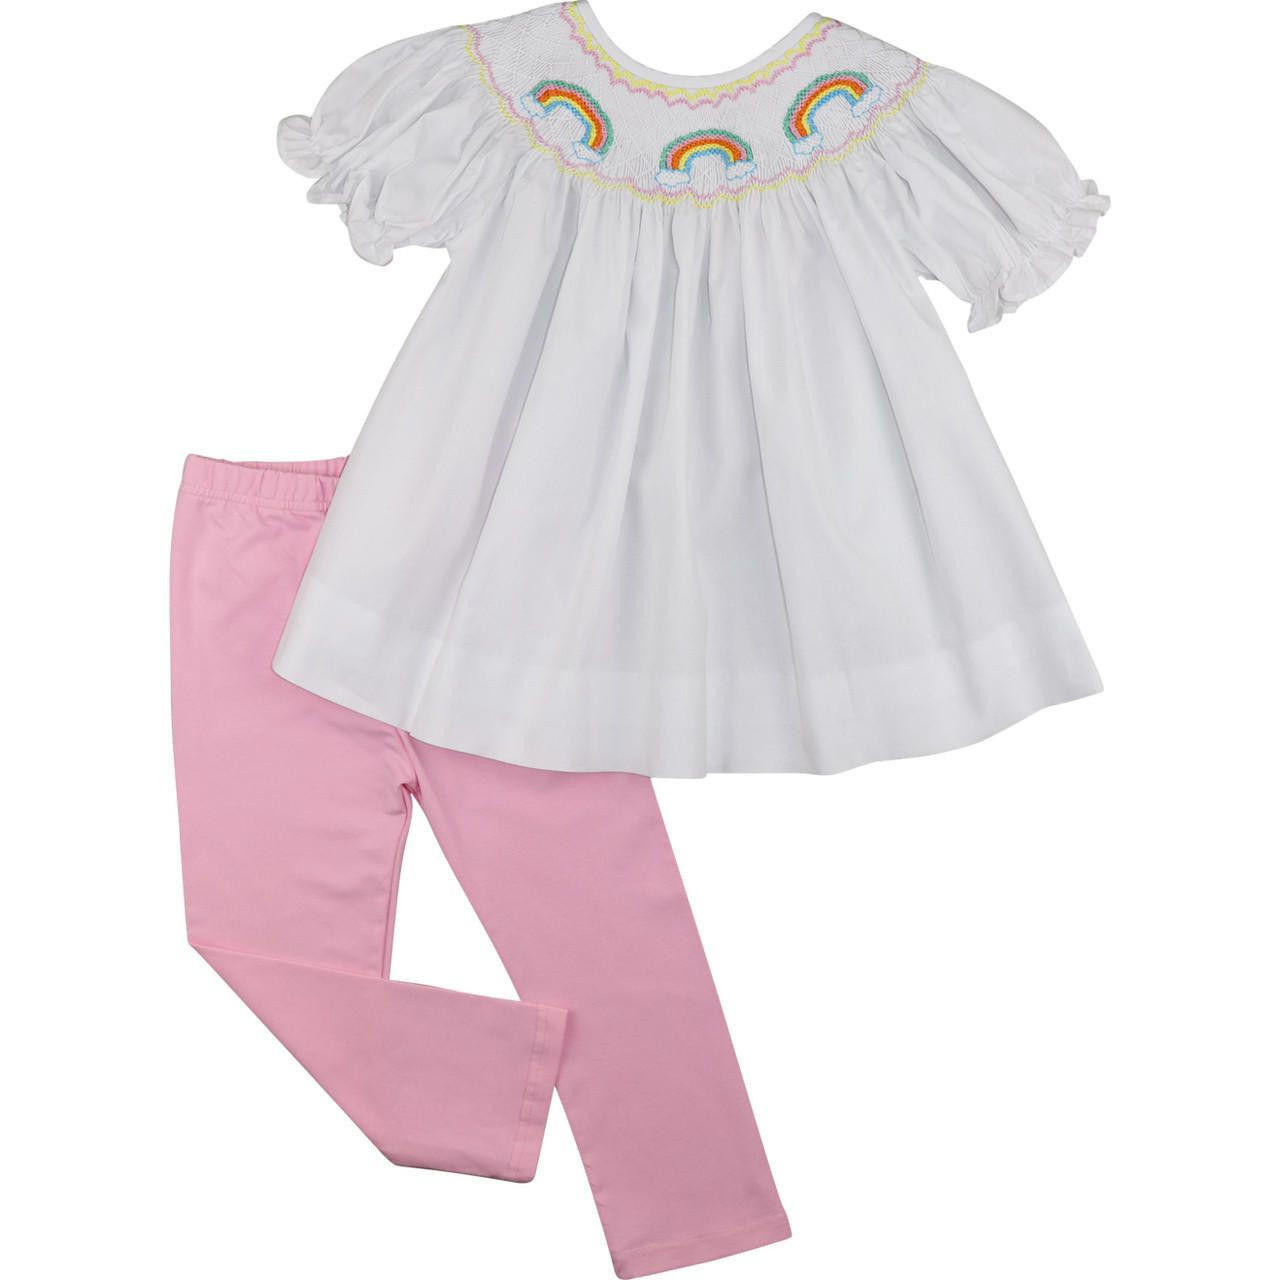 Smocked Set White Cecil Legging Pink Lou And and Rainbow -